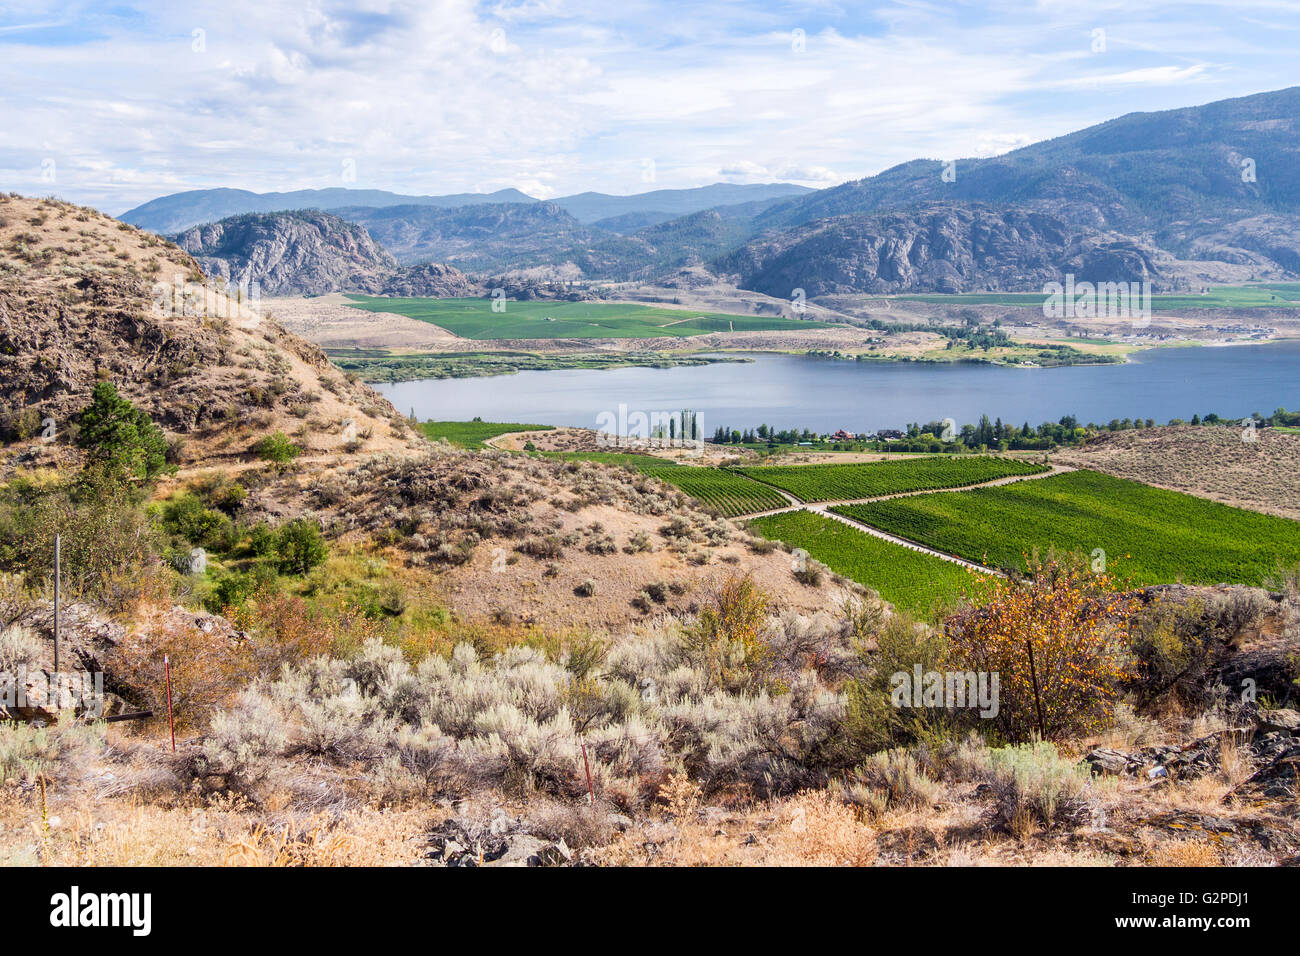 View of desert, vineyards and Osoyoos Lake, seen from a rest area on the Crowsnest Highway near Osoyoos, BC, Canada Stock Photo